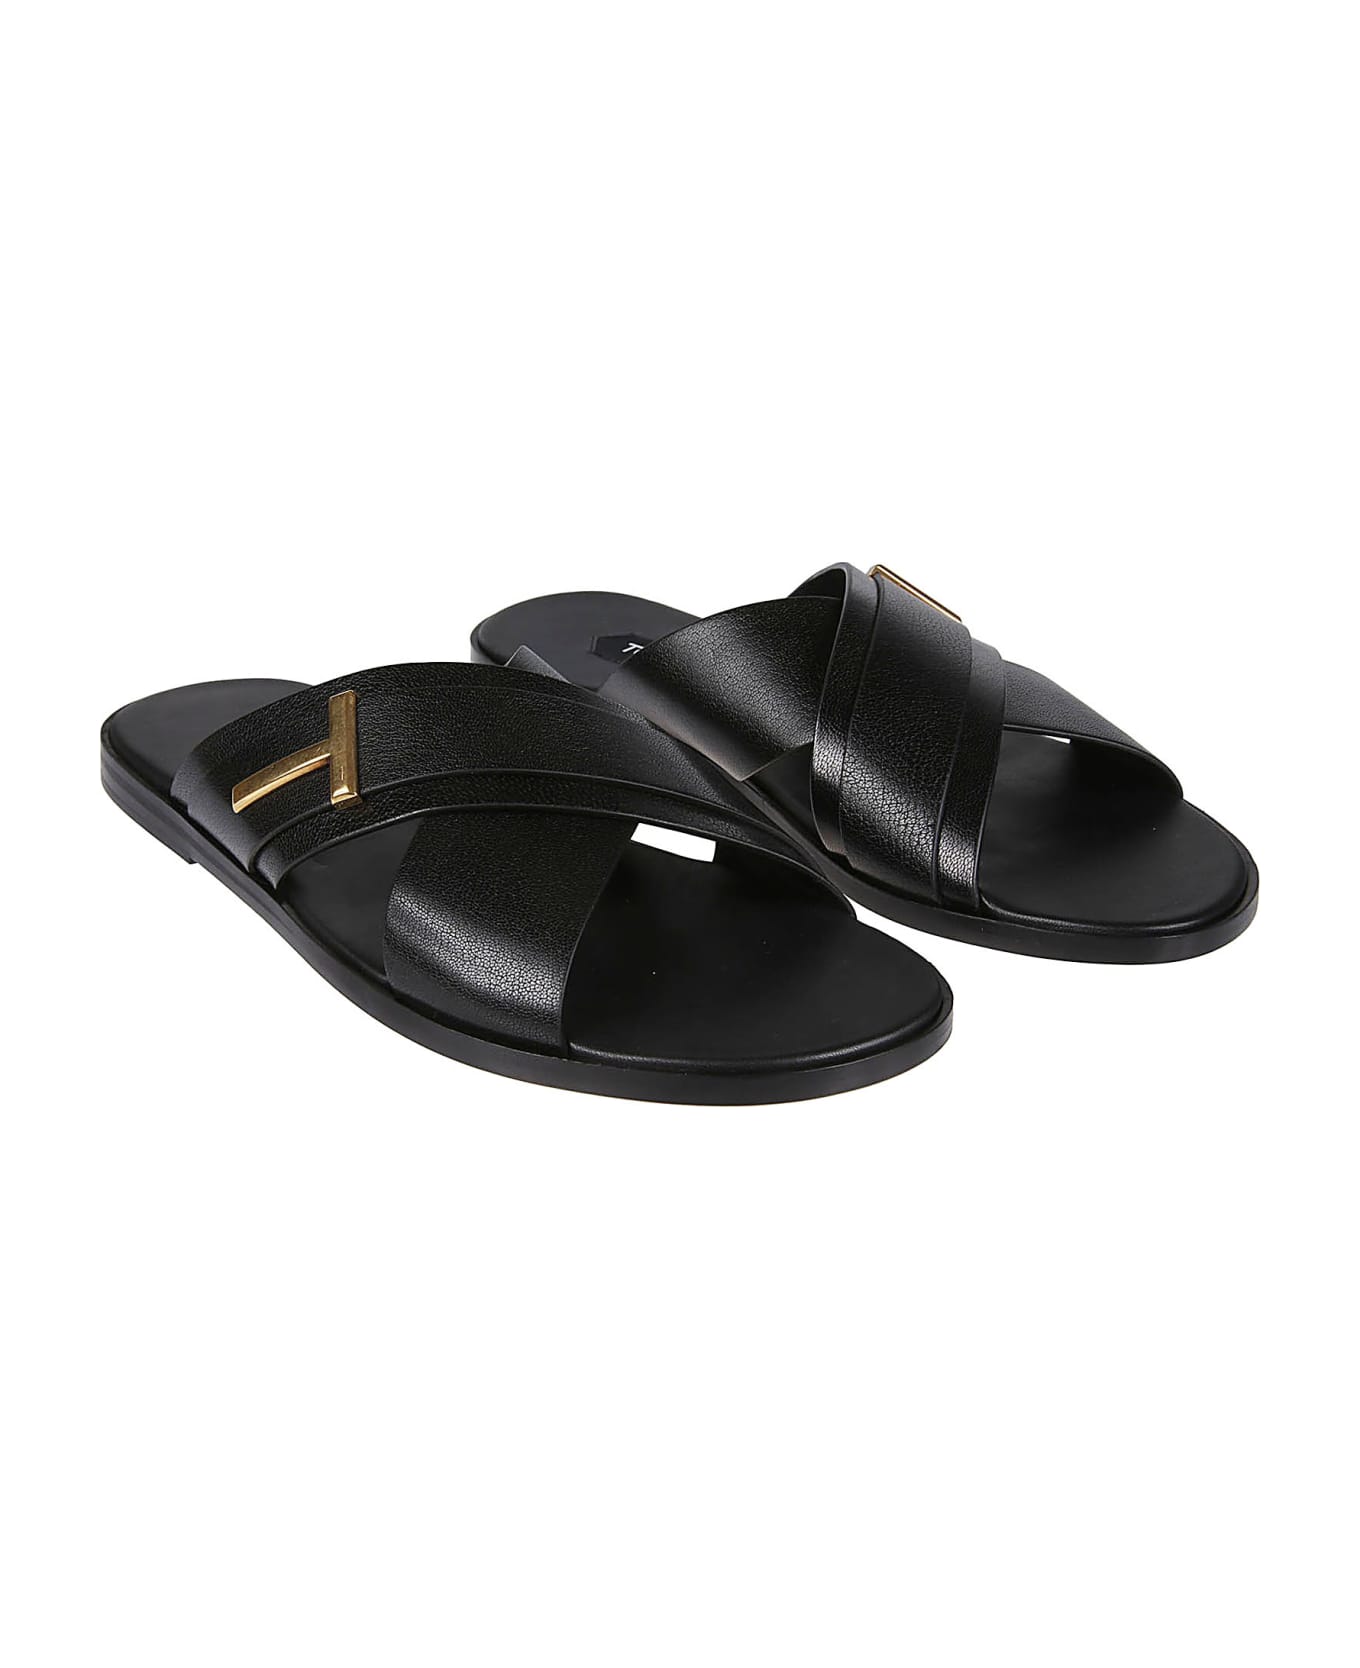 Tom Ford Leather Sandals - Black その他各種シューズ